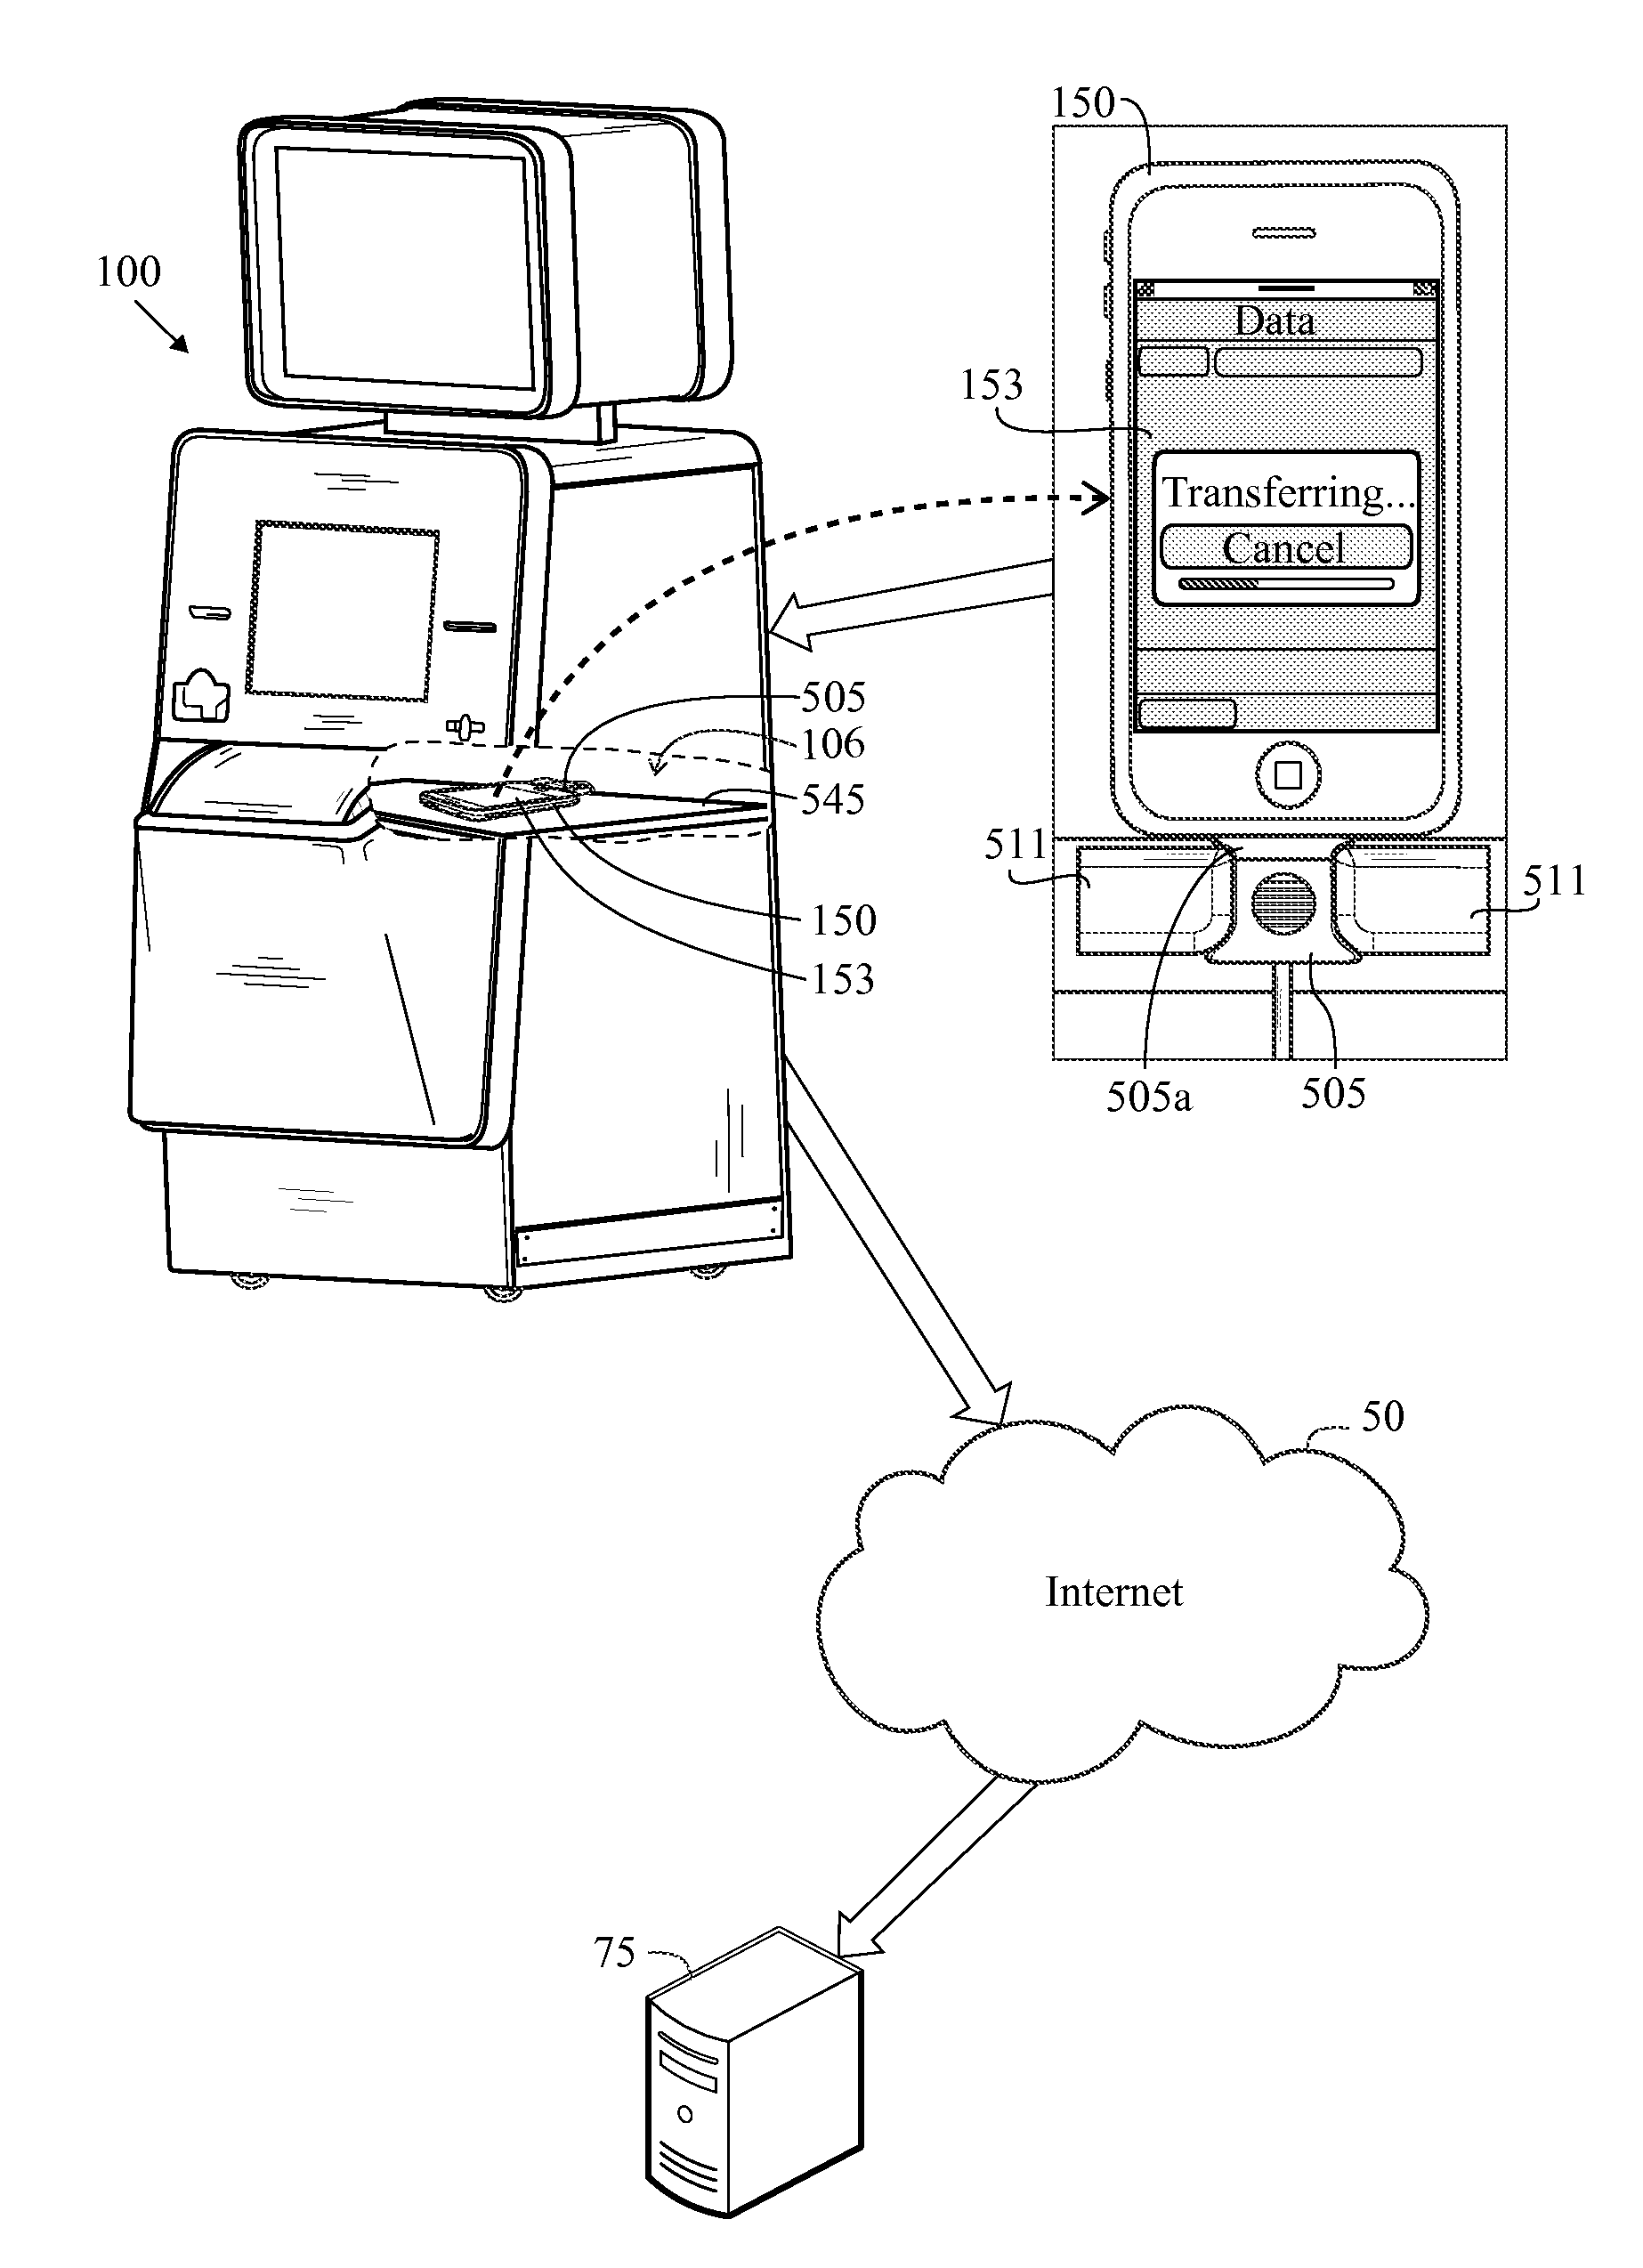 Method And System For Removing And Transferring Data From A Recycled Electronic Device